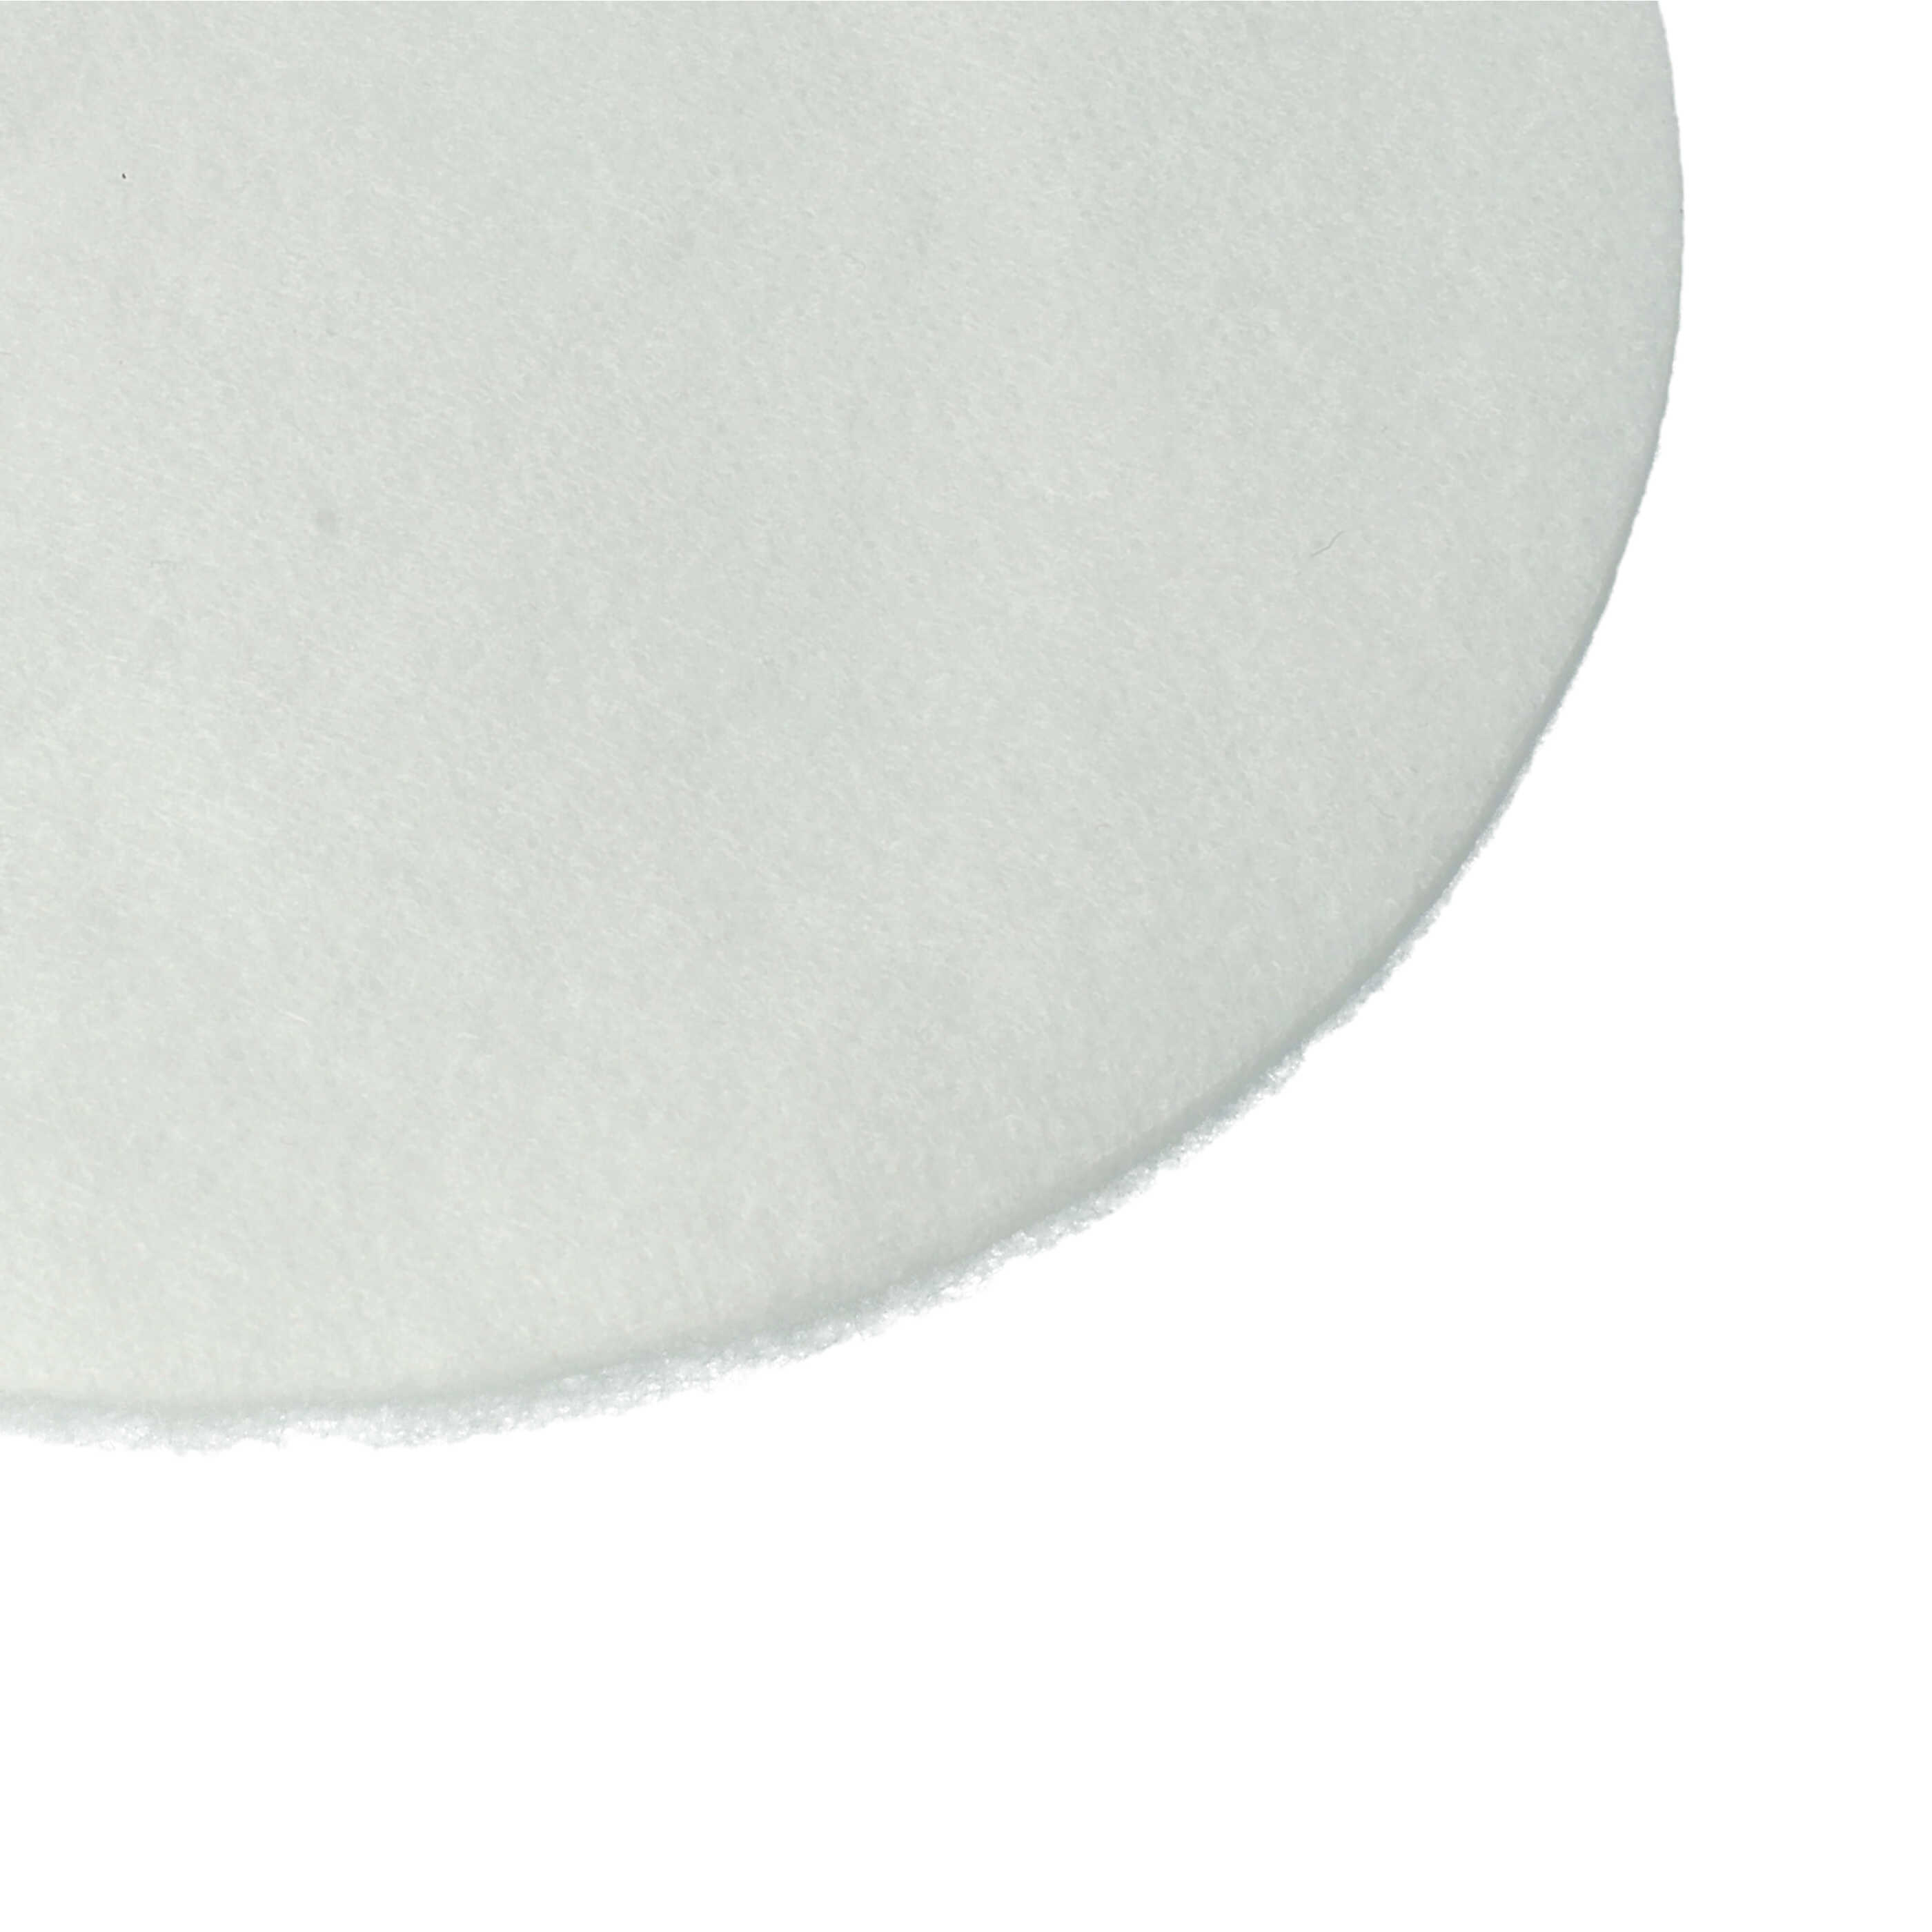 Filter Sleeve suitable for Dyson DC19 Vacuum Cleaner - Filter Protection White